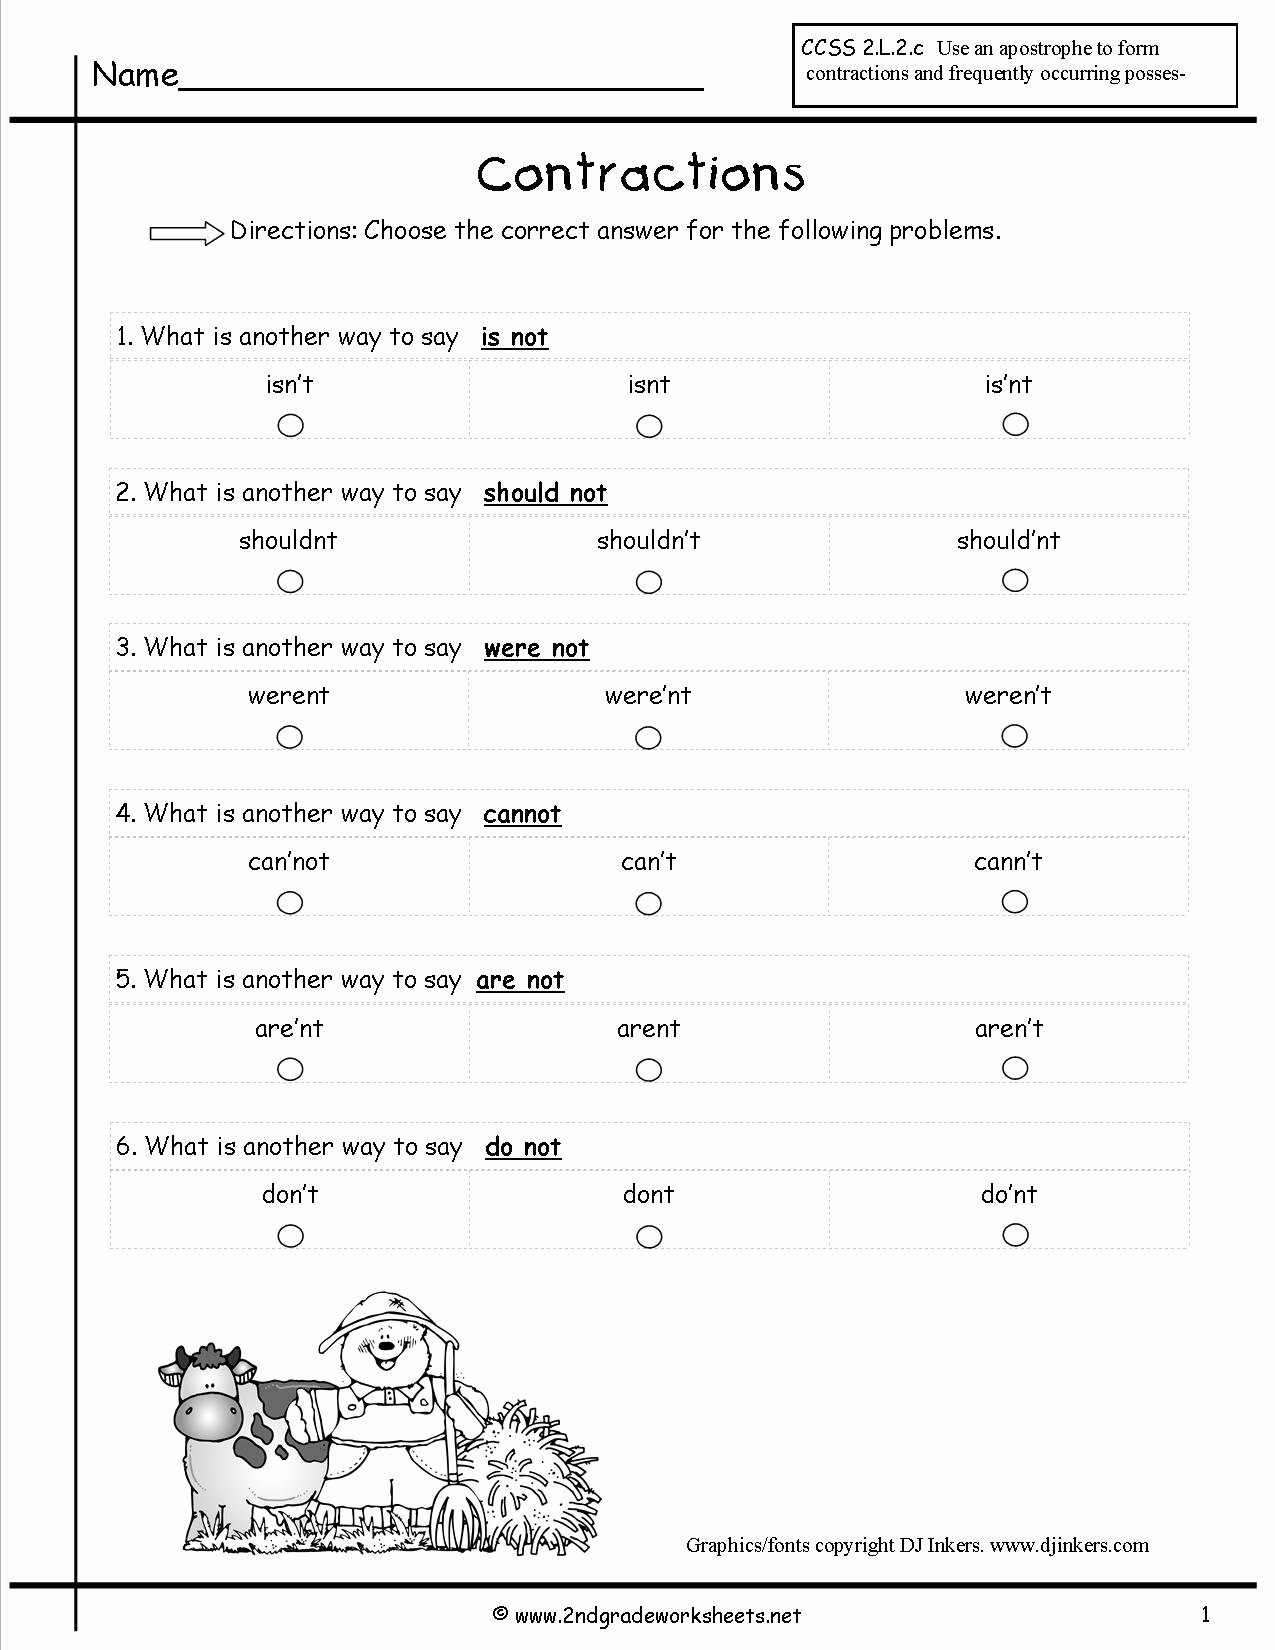 Contractions Worksheet 2nd Grade Unique Free Contractions Worksheets and Printouts